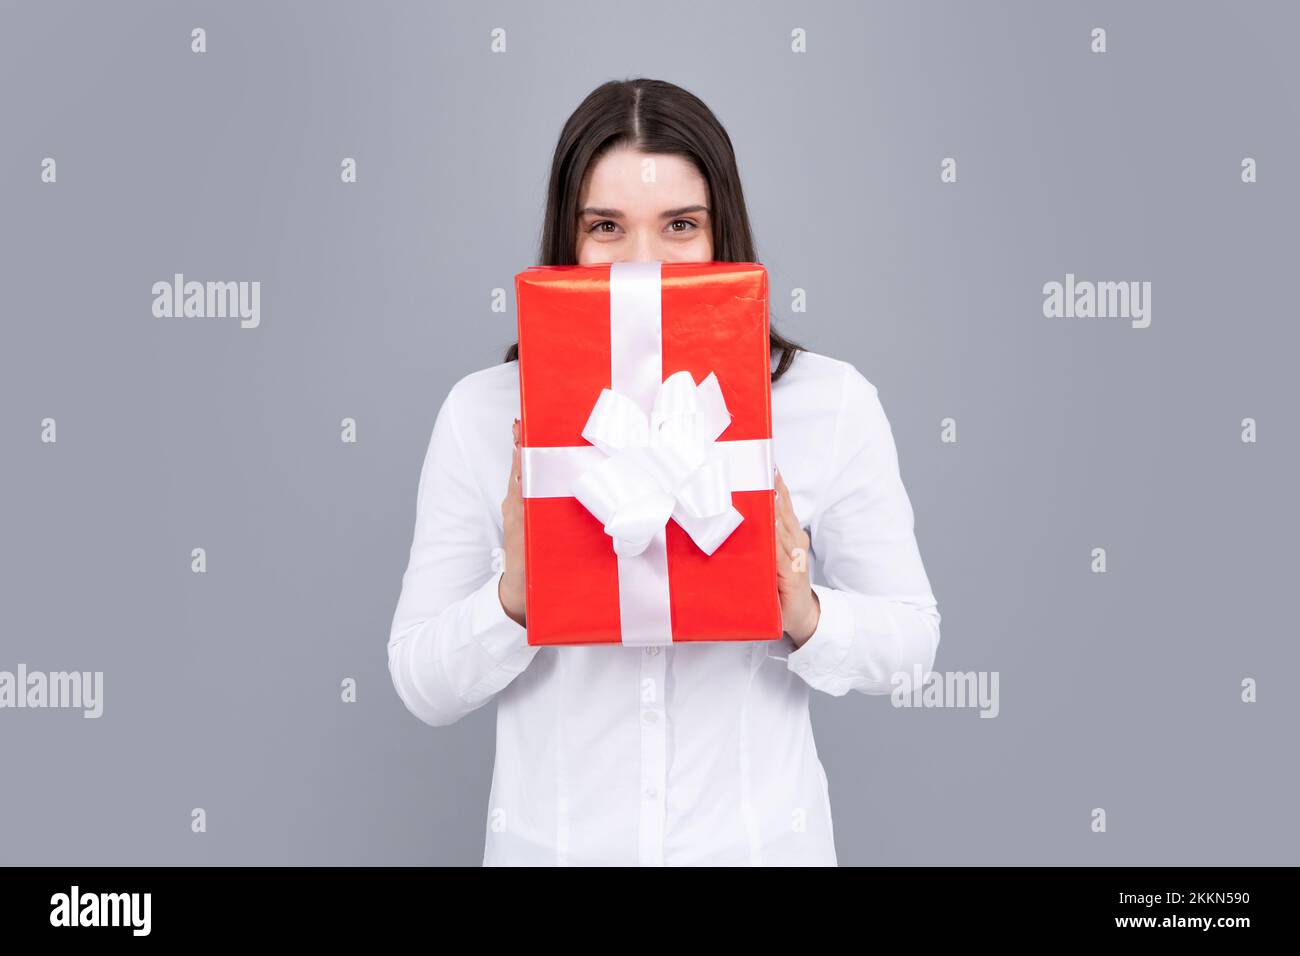 Happy birthday. Woman holding gift box with ribbon. Studio portrait over gray background. Stock Photo